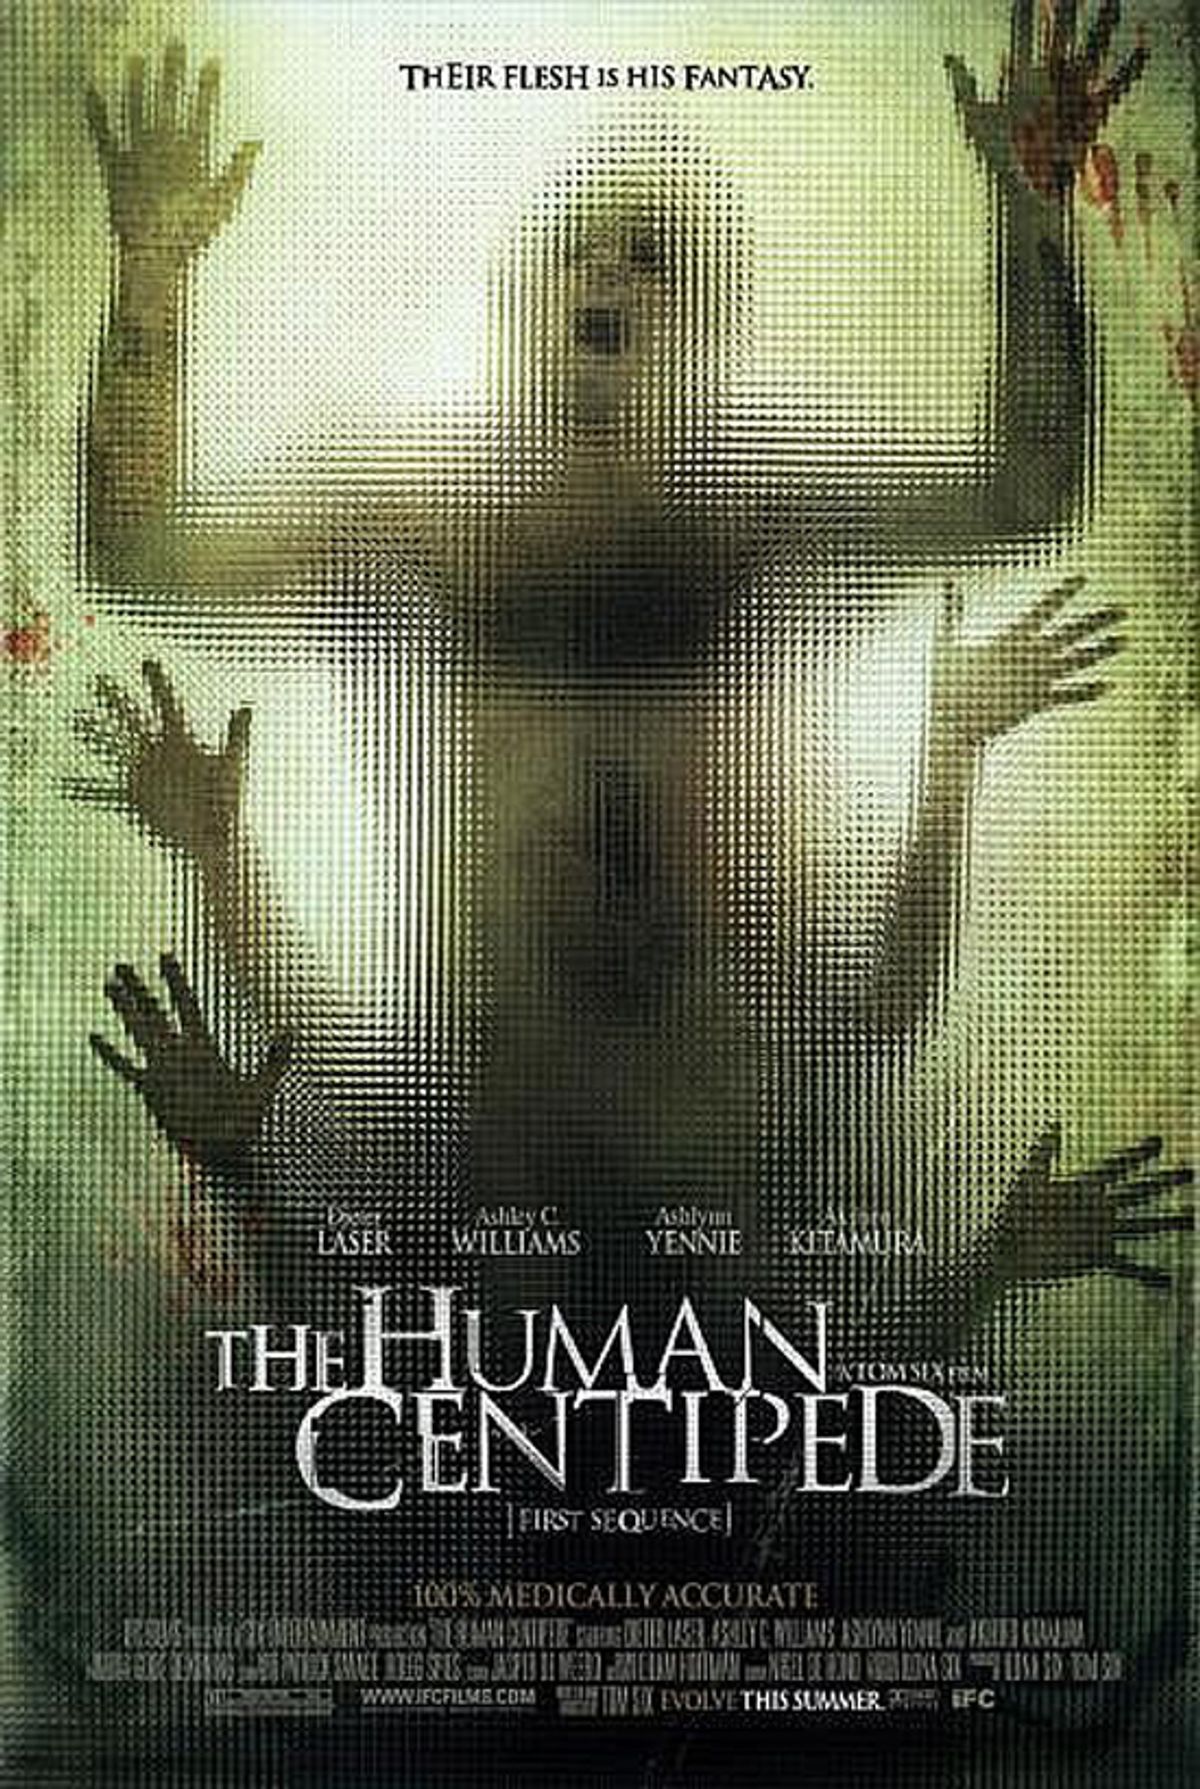 Detail of poster from "The Human Centipede"